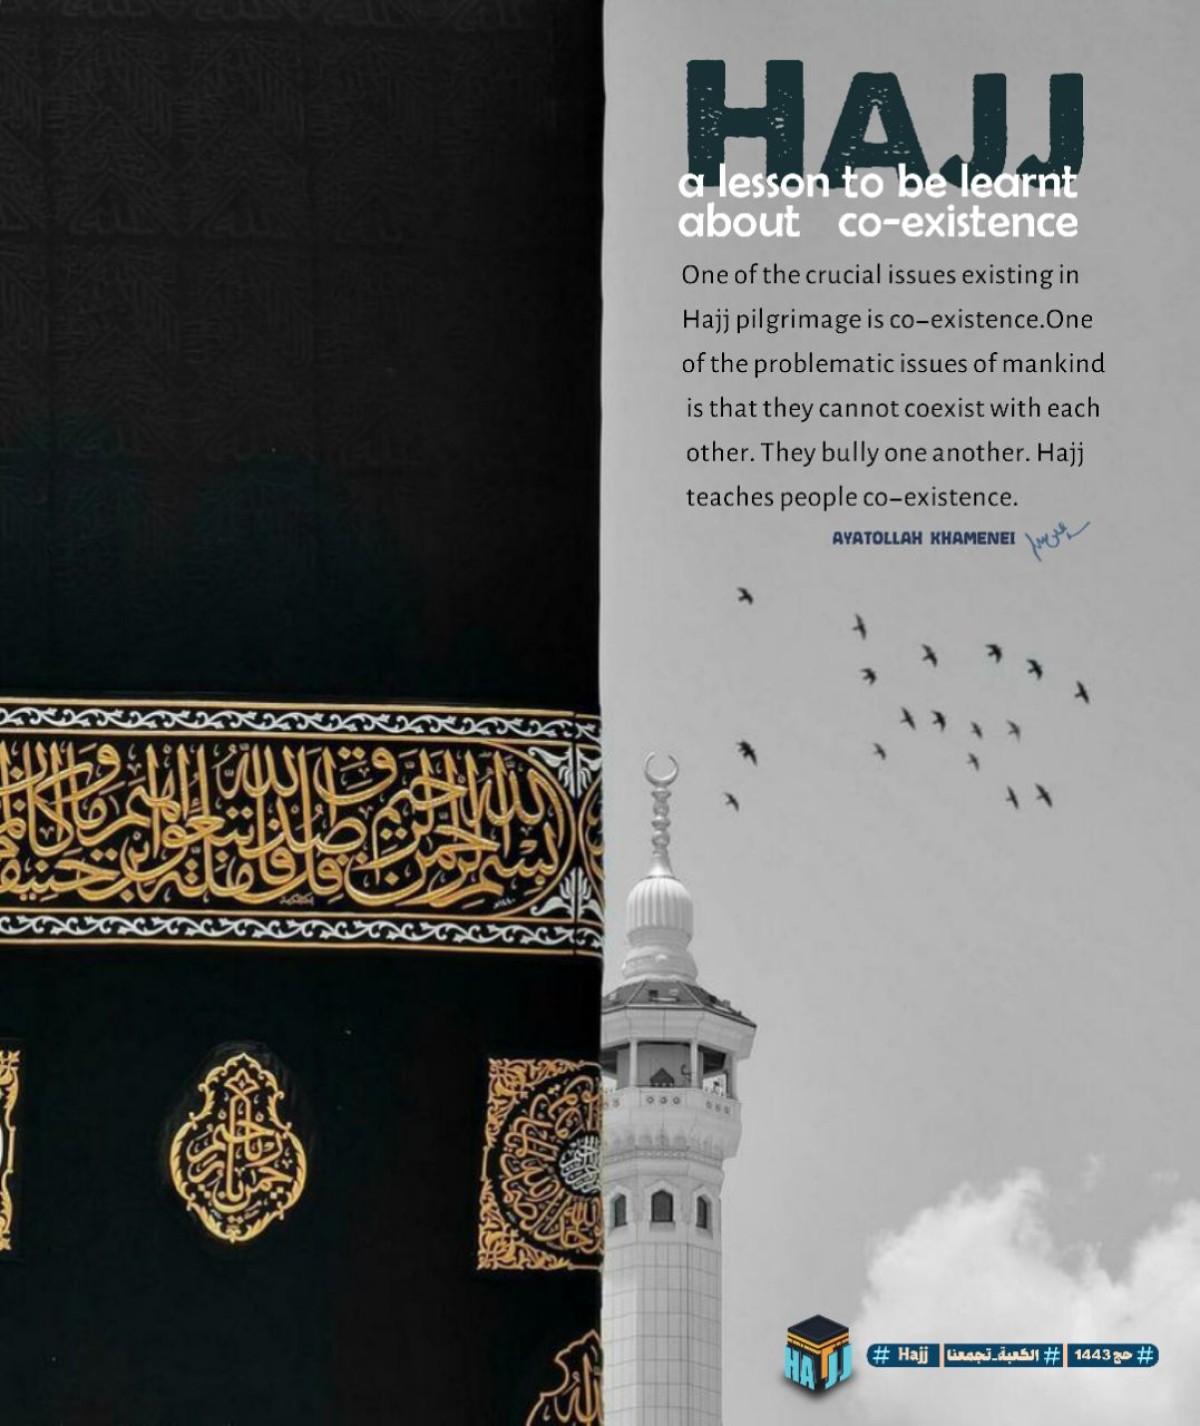 hajj a lesson to be learnt about c0-exstence